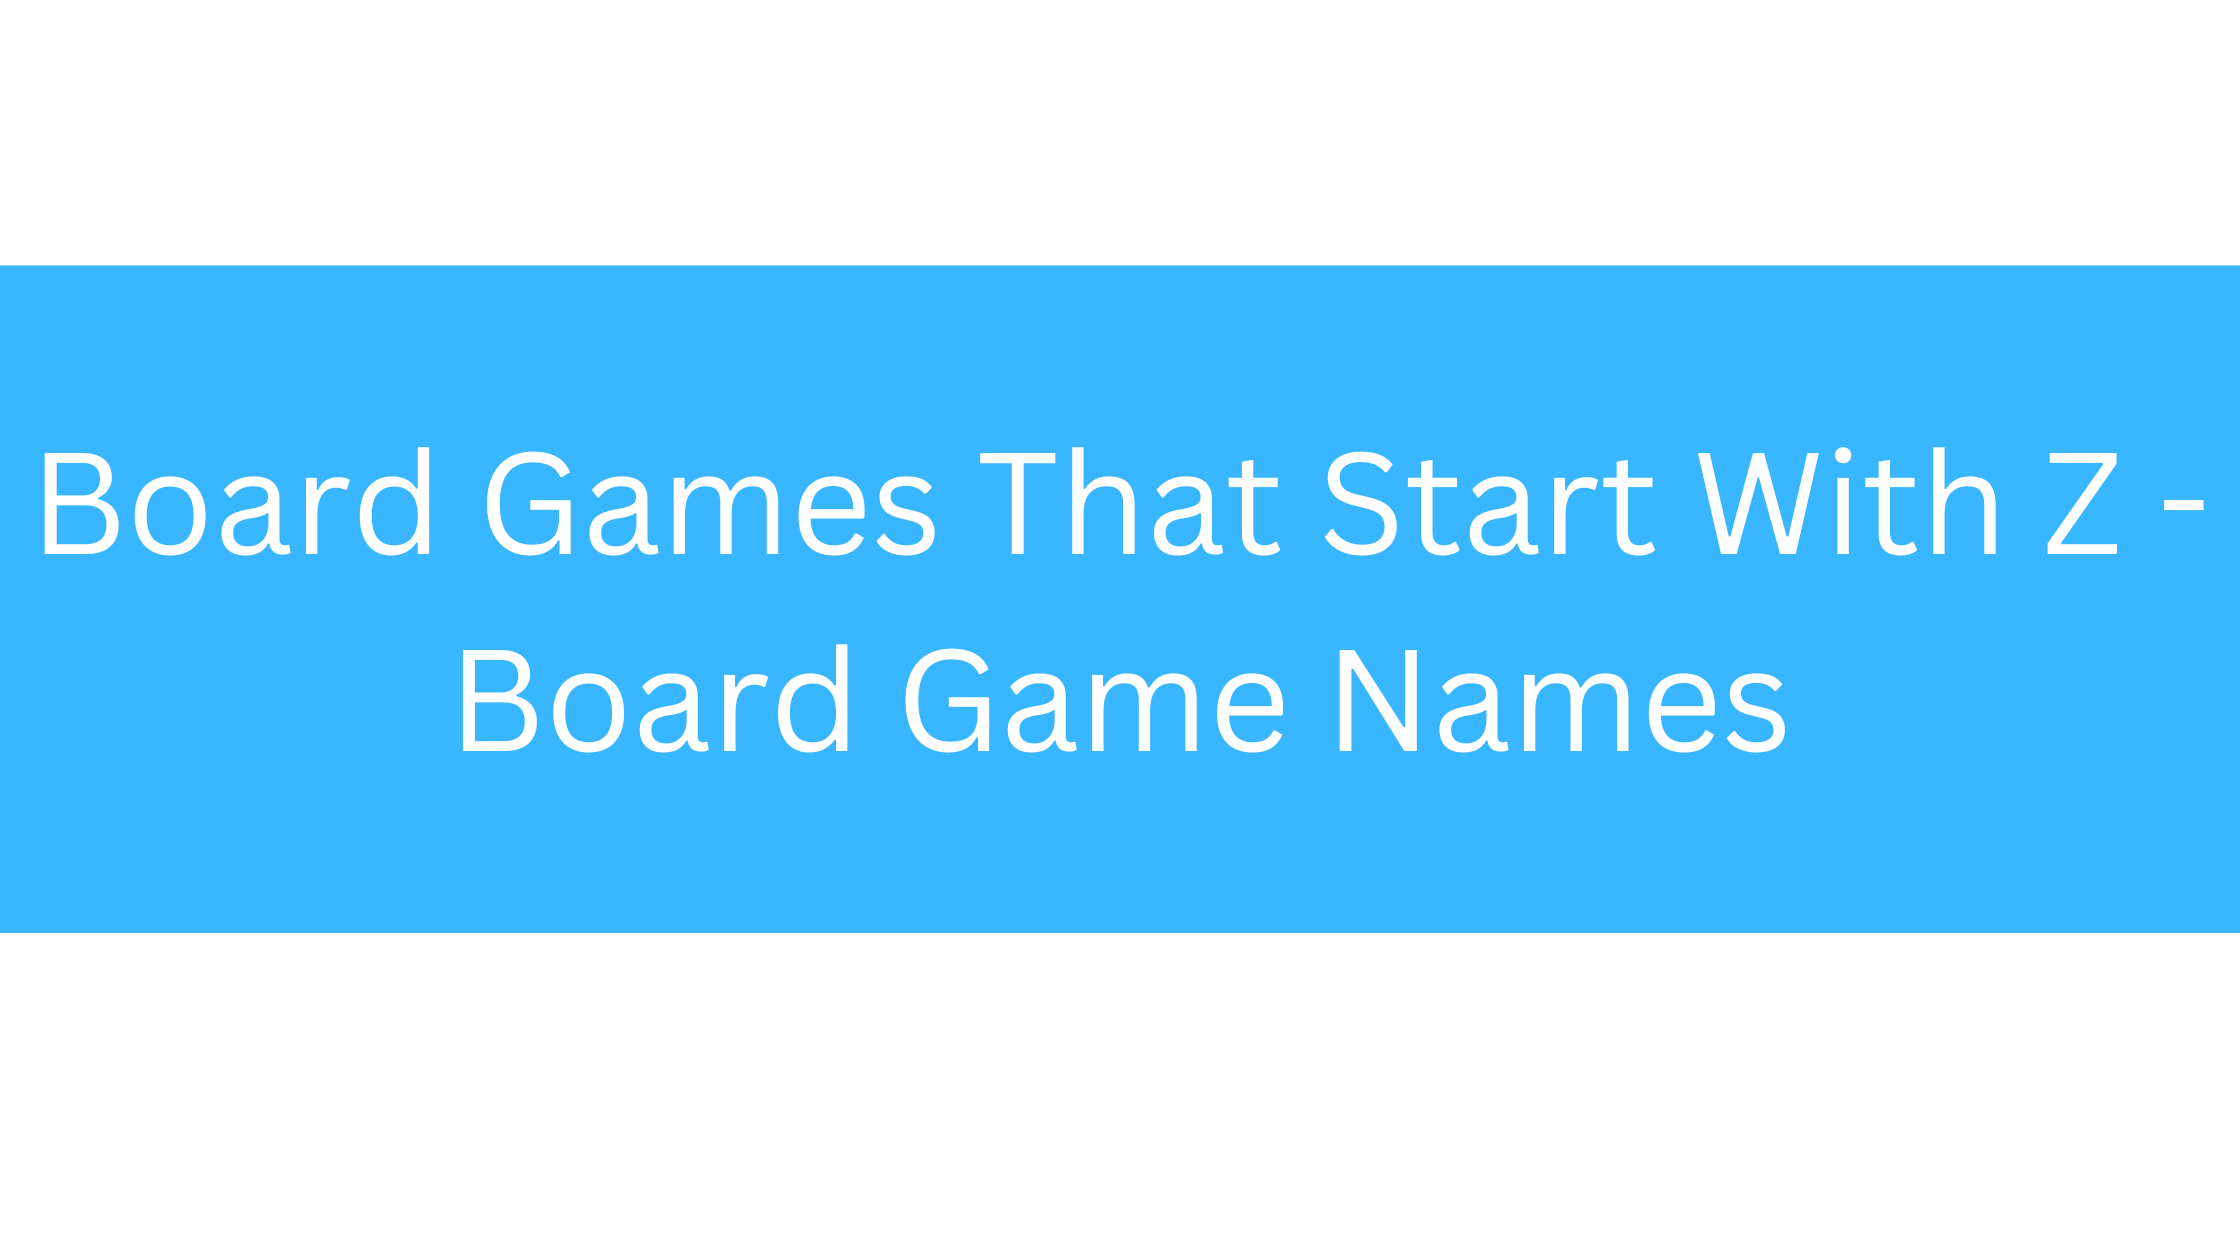 Board Games That Start With Z